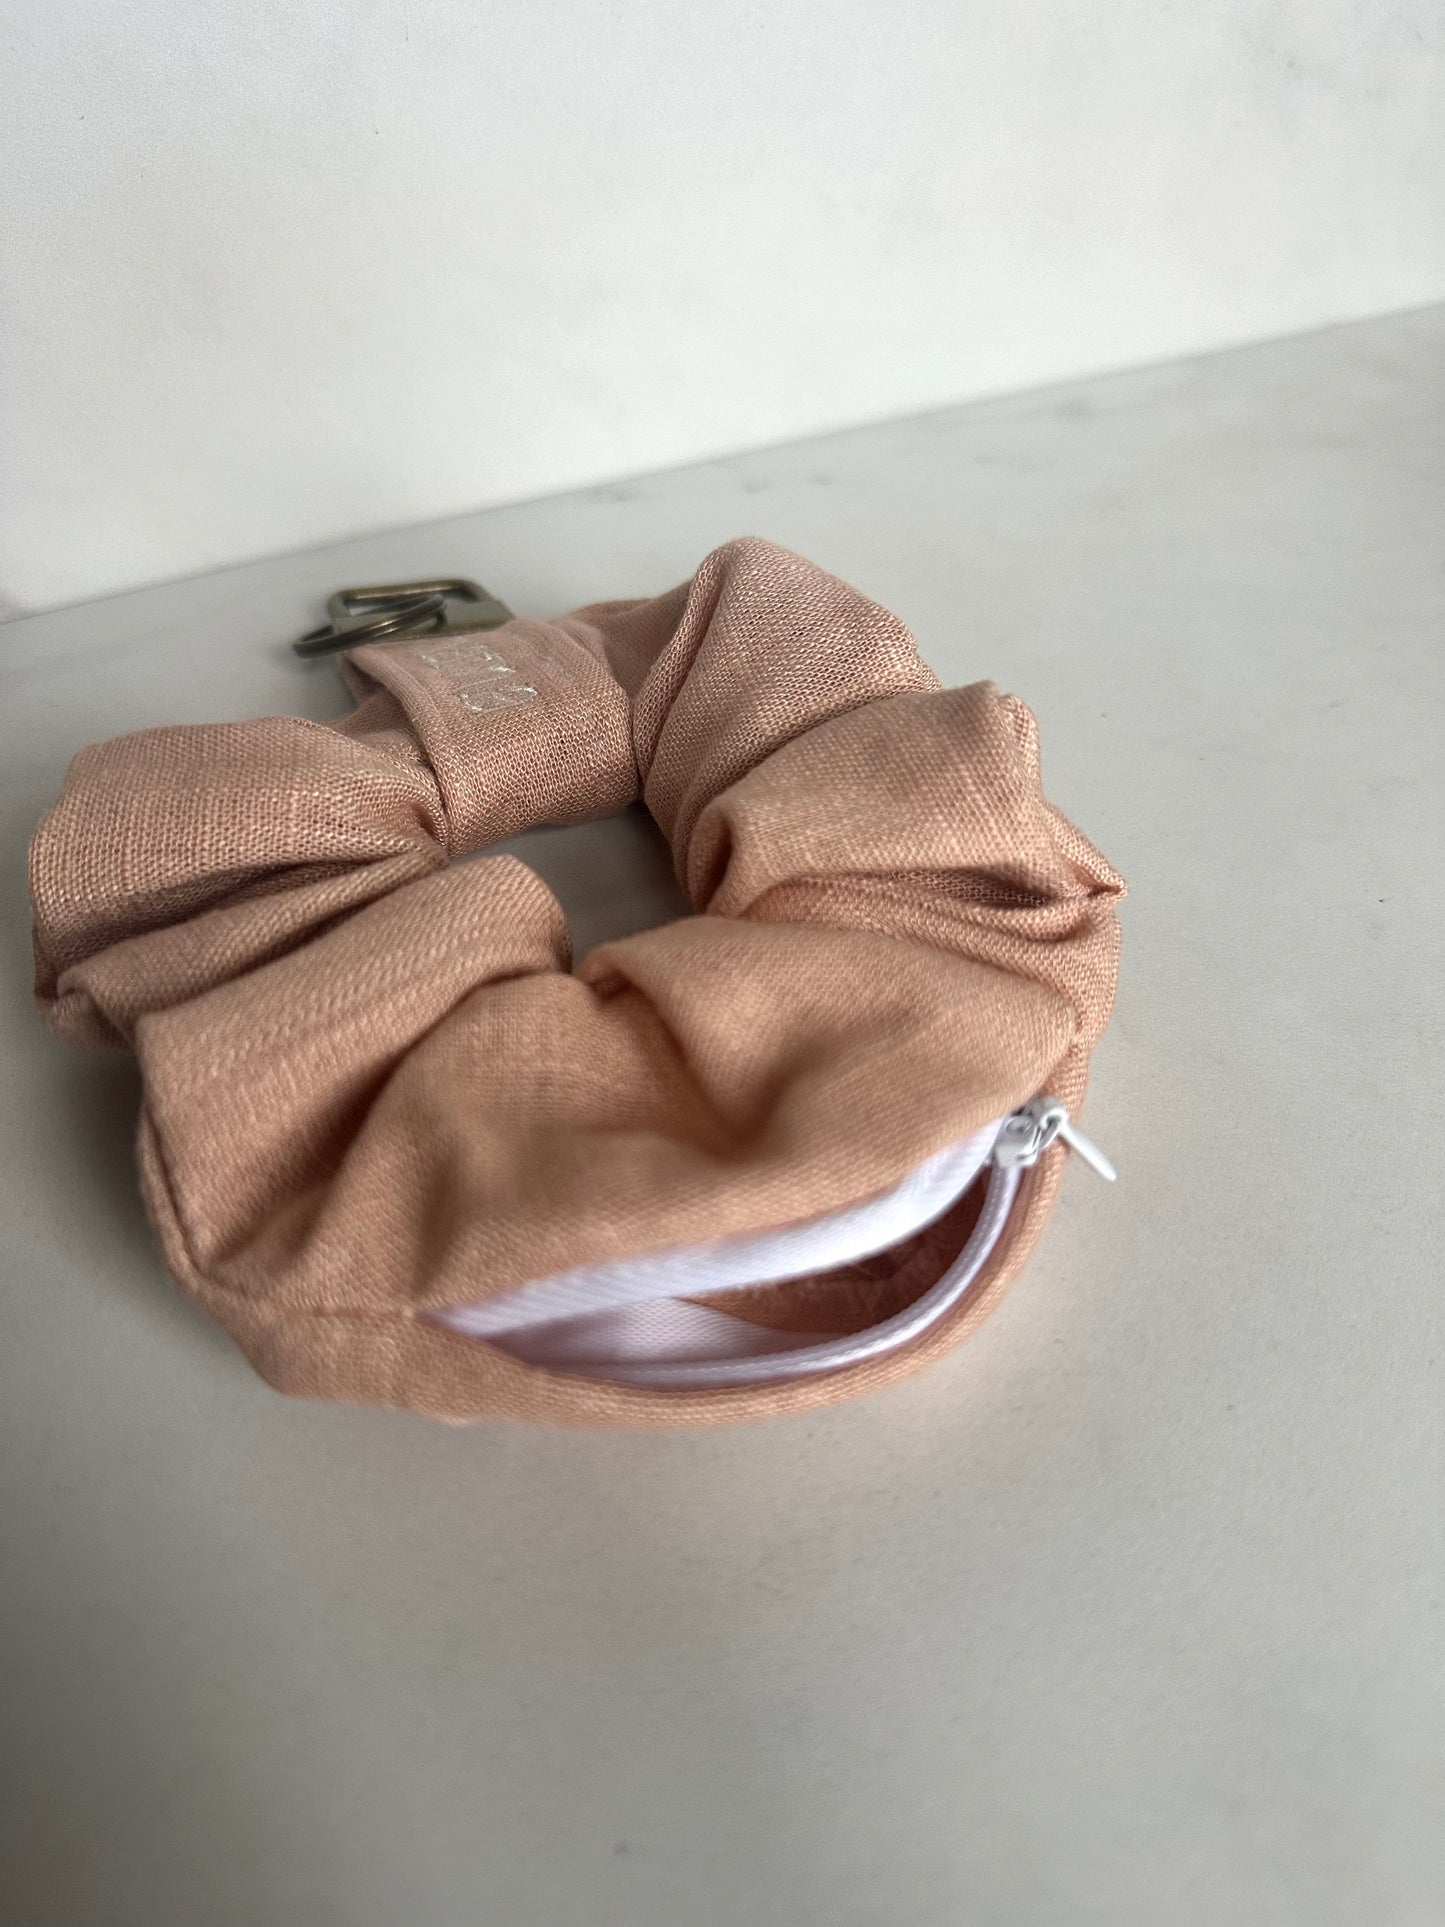 Embroidered Scrunchie Key Chain with Zipper